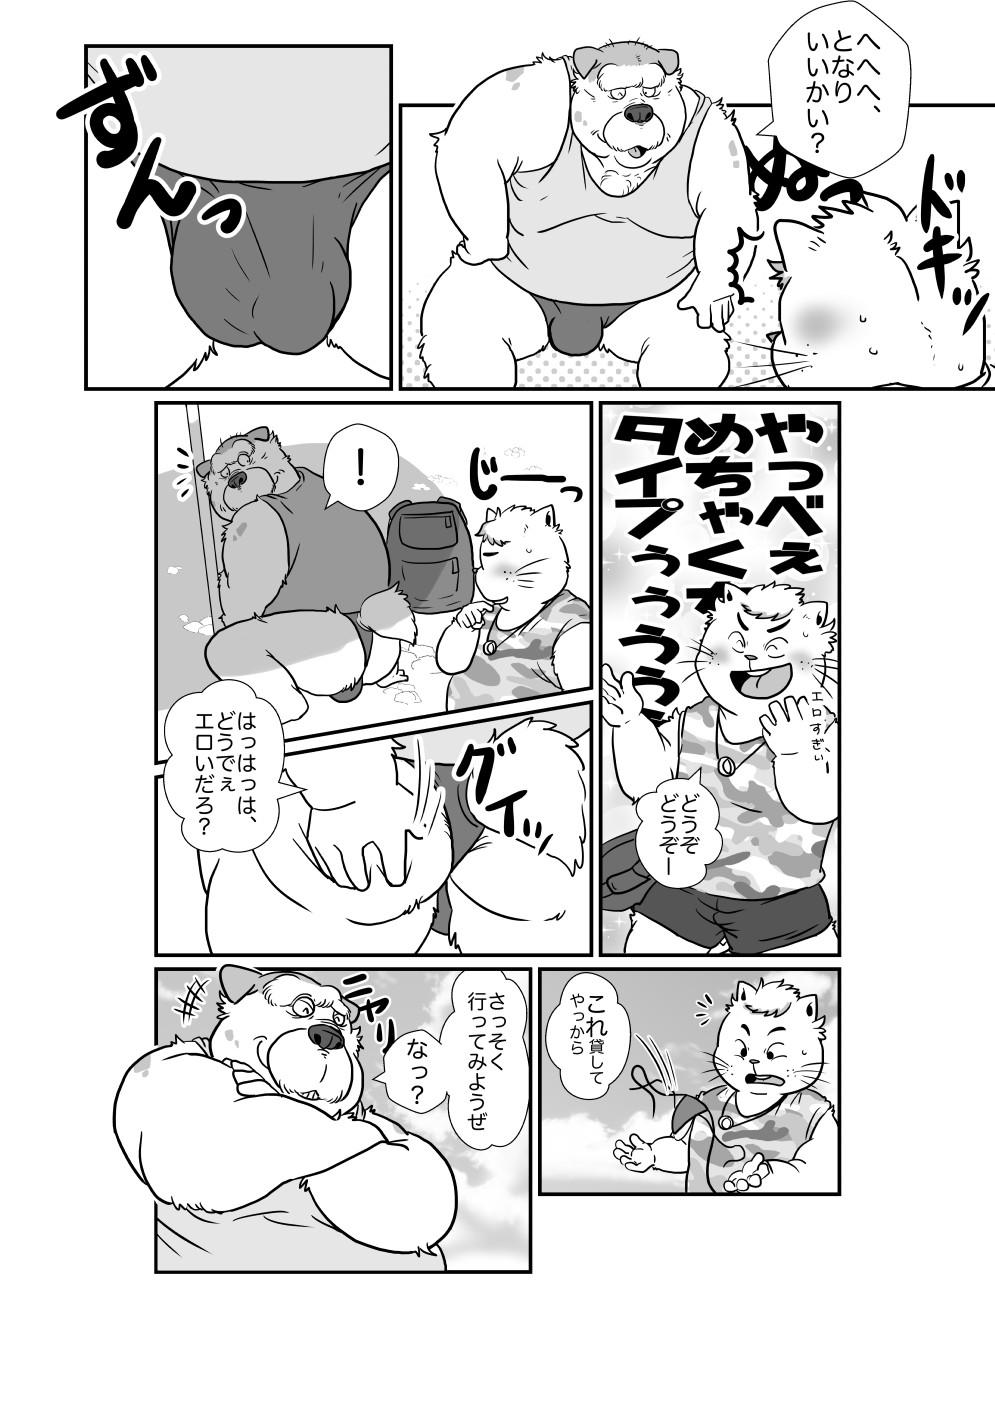 Family Sex 【ハッテンビーチ】ふぃすとふぁっく【ケモホモ注意】 Daddy - Page 6